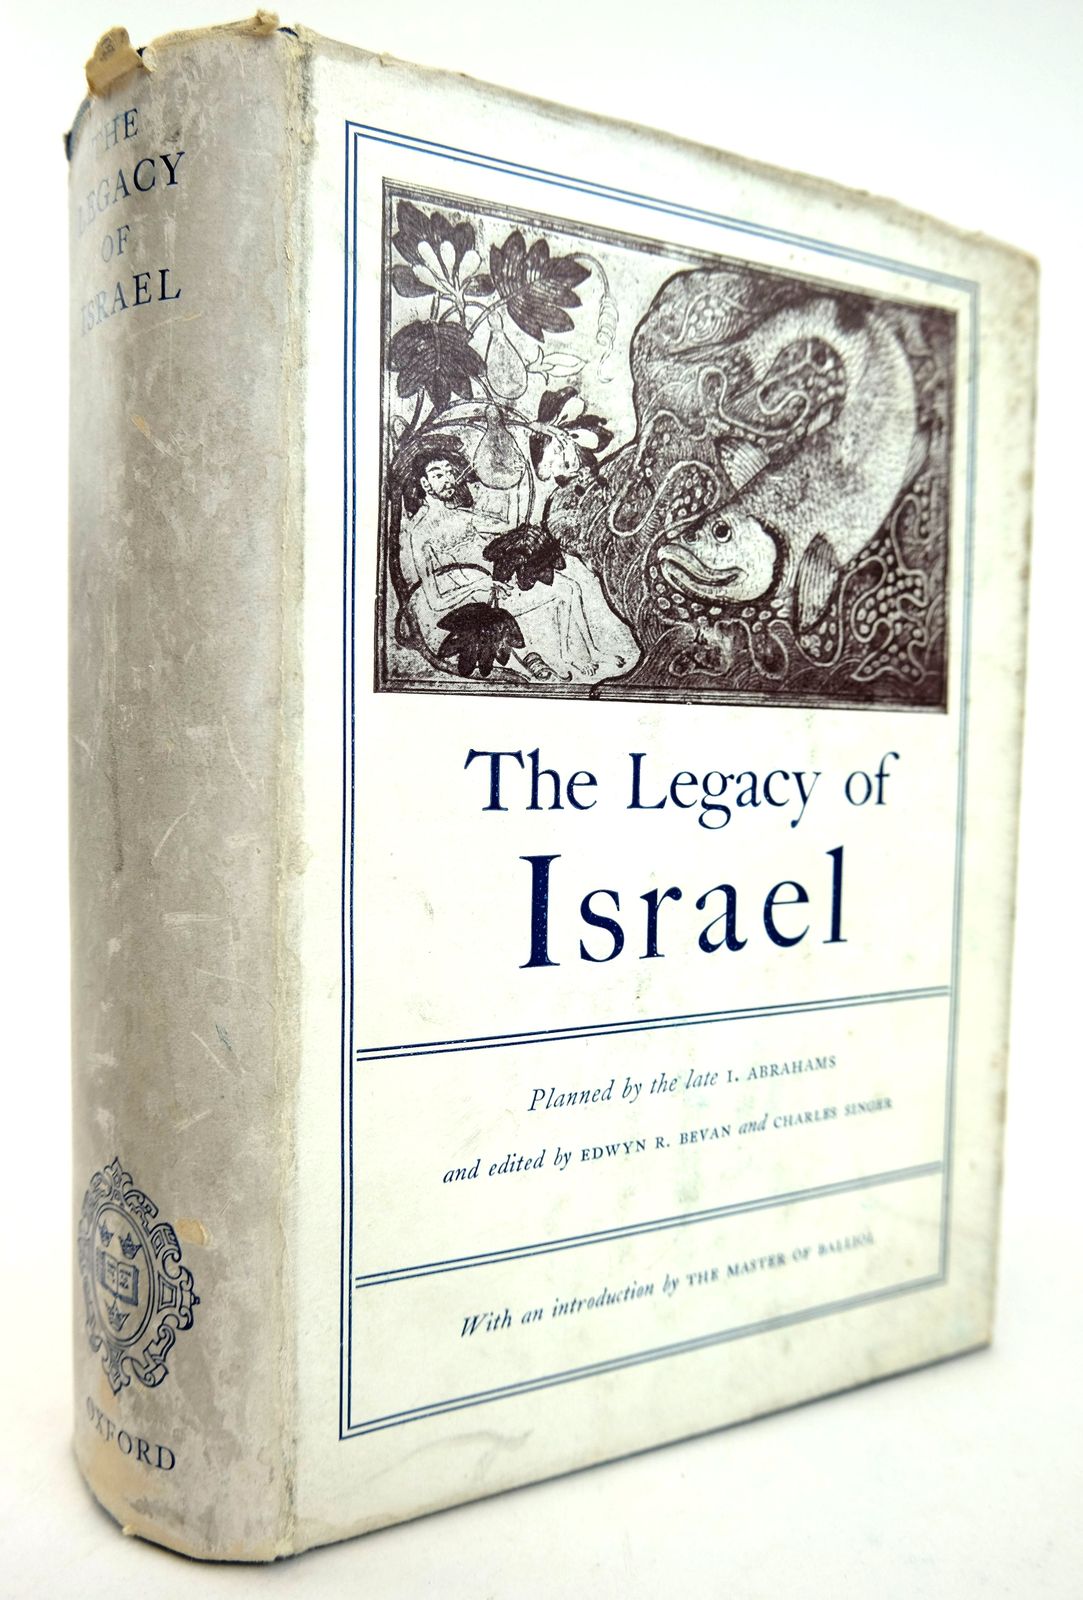 Photo of THE LEGACY OF ISRAEL written by Abrahams, I. published by Oxford at the Clarendon Press (STOCK CODE: 1818856)  for sale by Stella & Rose's Books